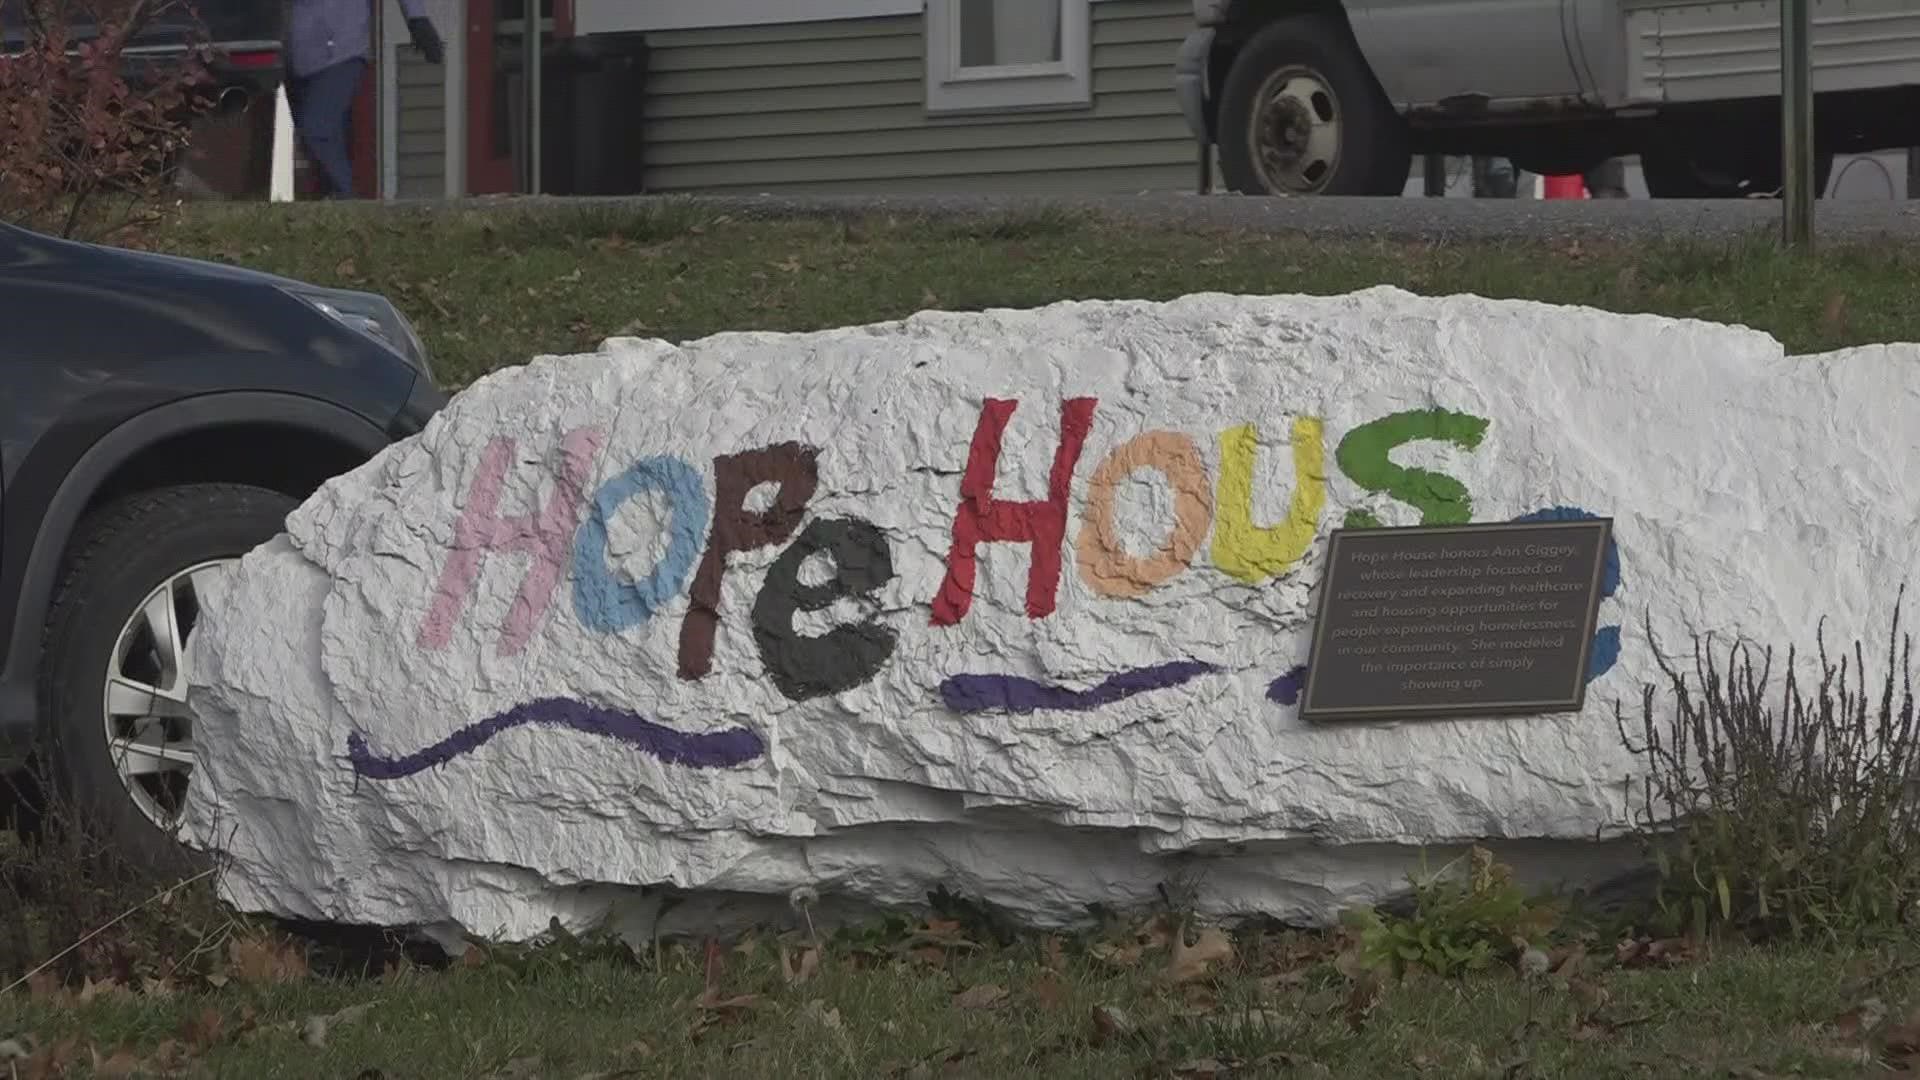 Those who were staying at the Ramada Inn shelter will soon have to relocate to Bangor's Hope House shelter, which is currently being renovated.